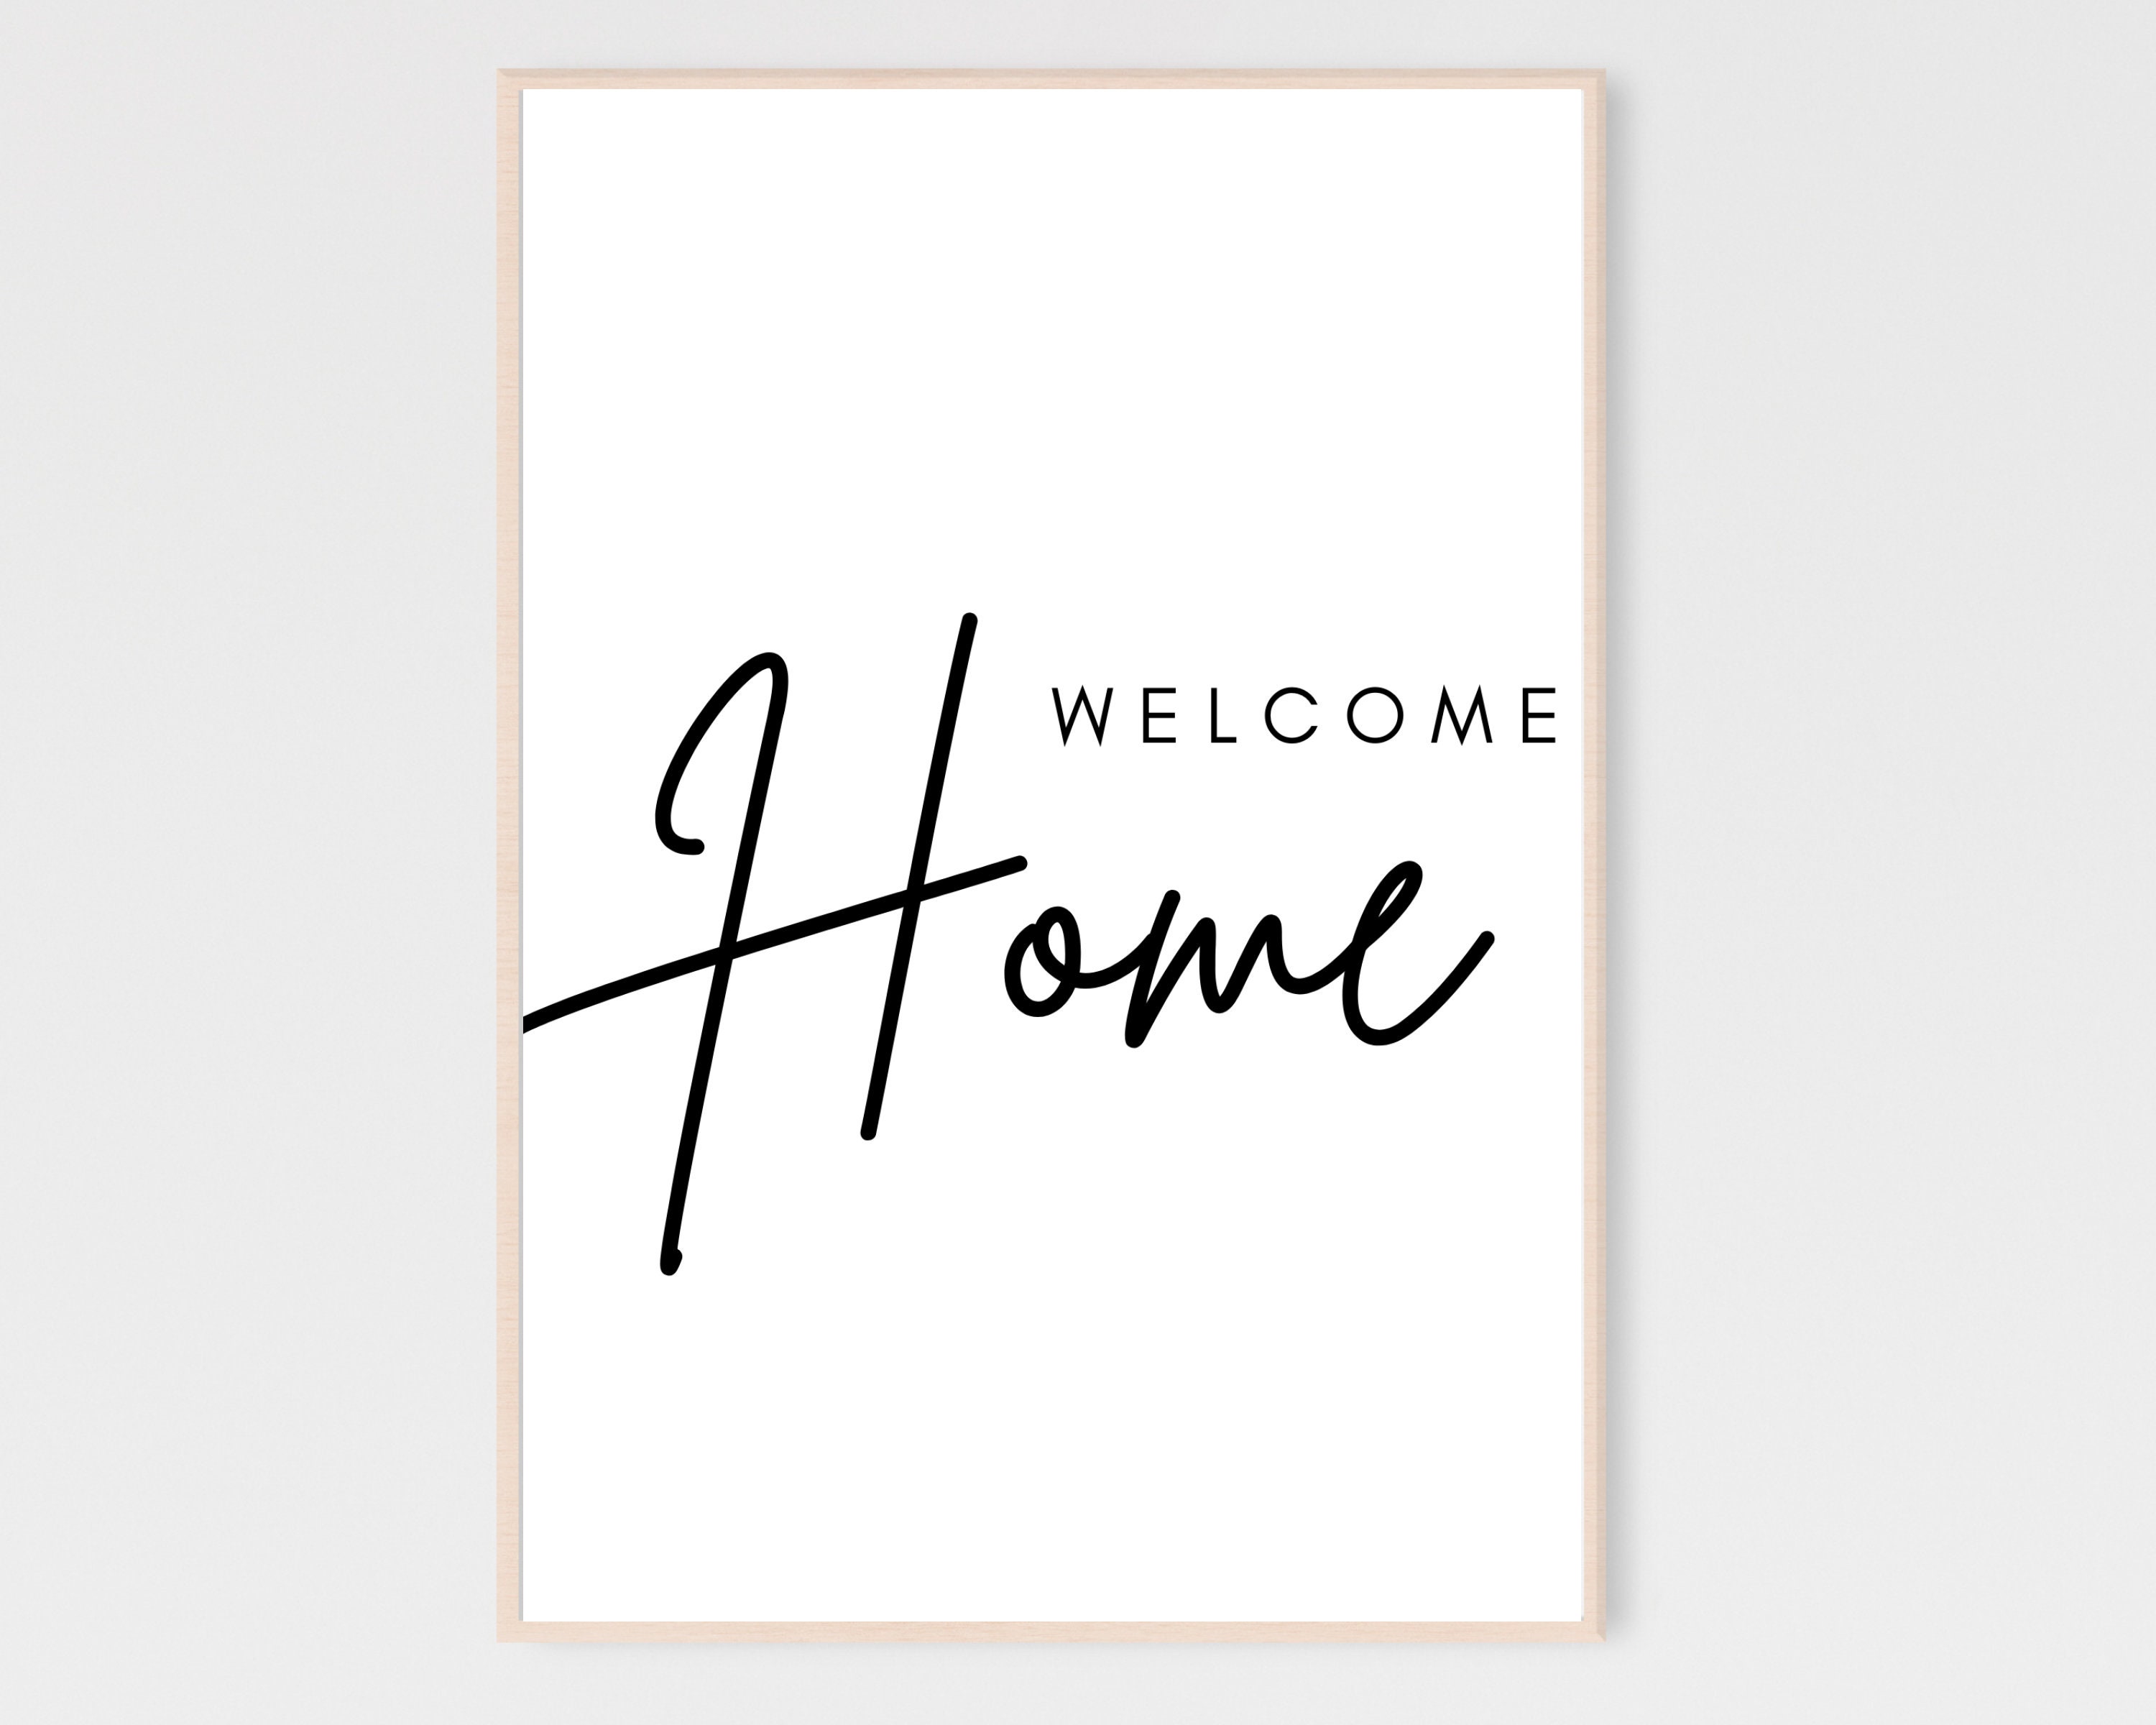 Welcome home hall canvas prints - TenStickers